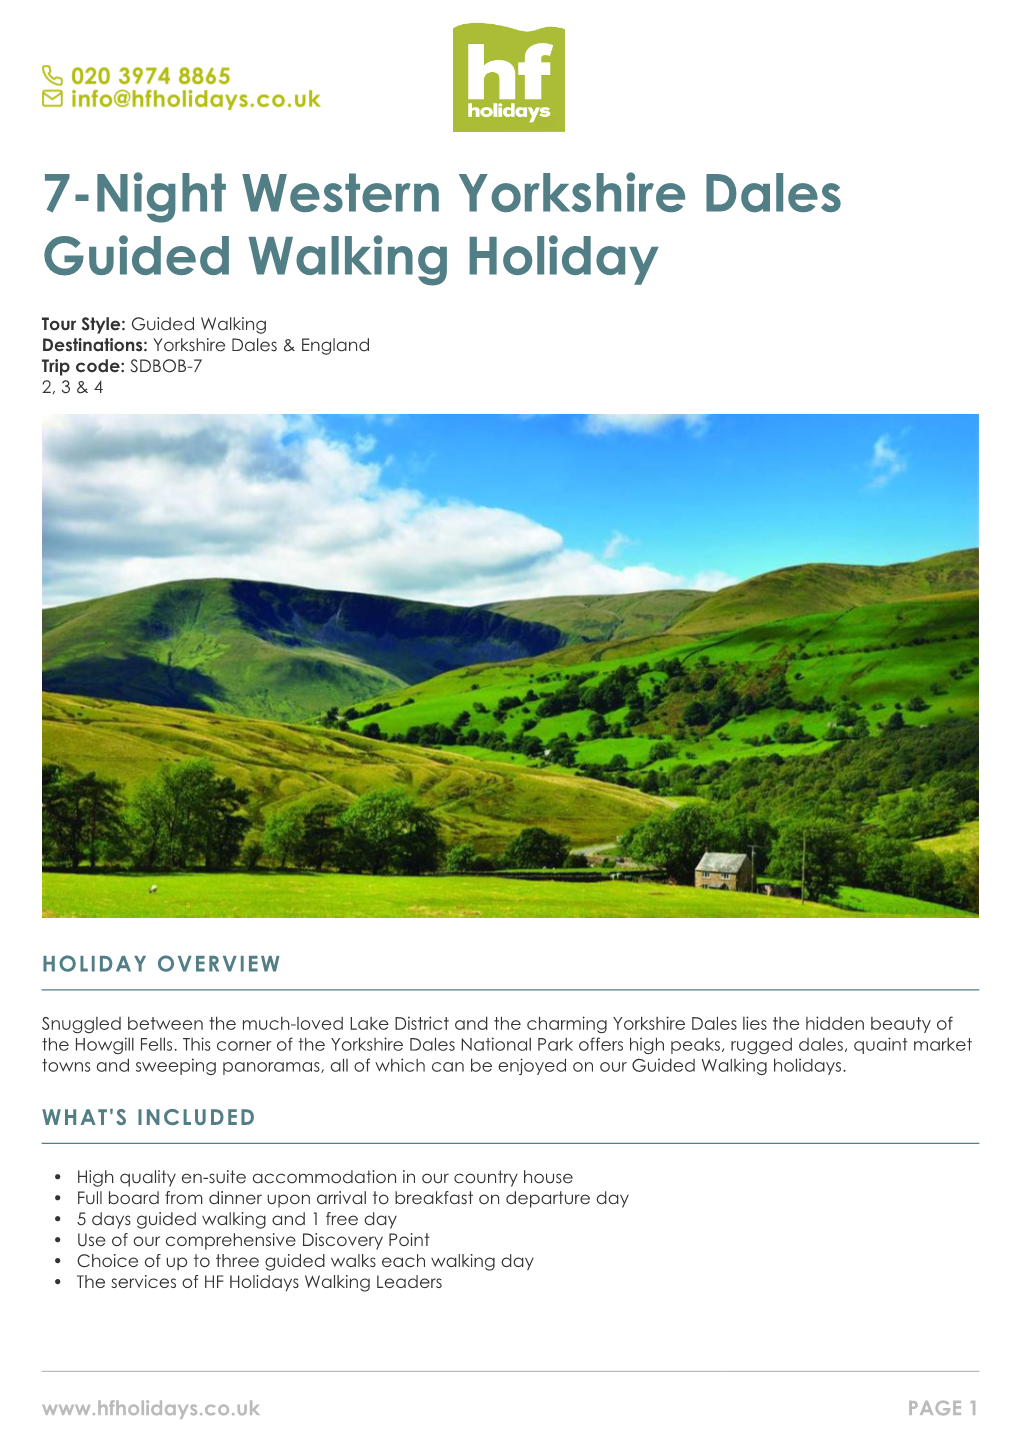 7-Night Western Yorkshire Dales Guided Walking Holiday